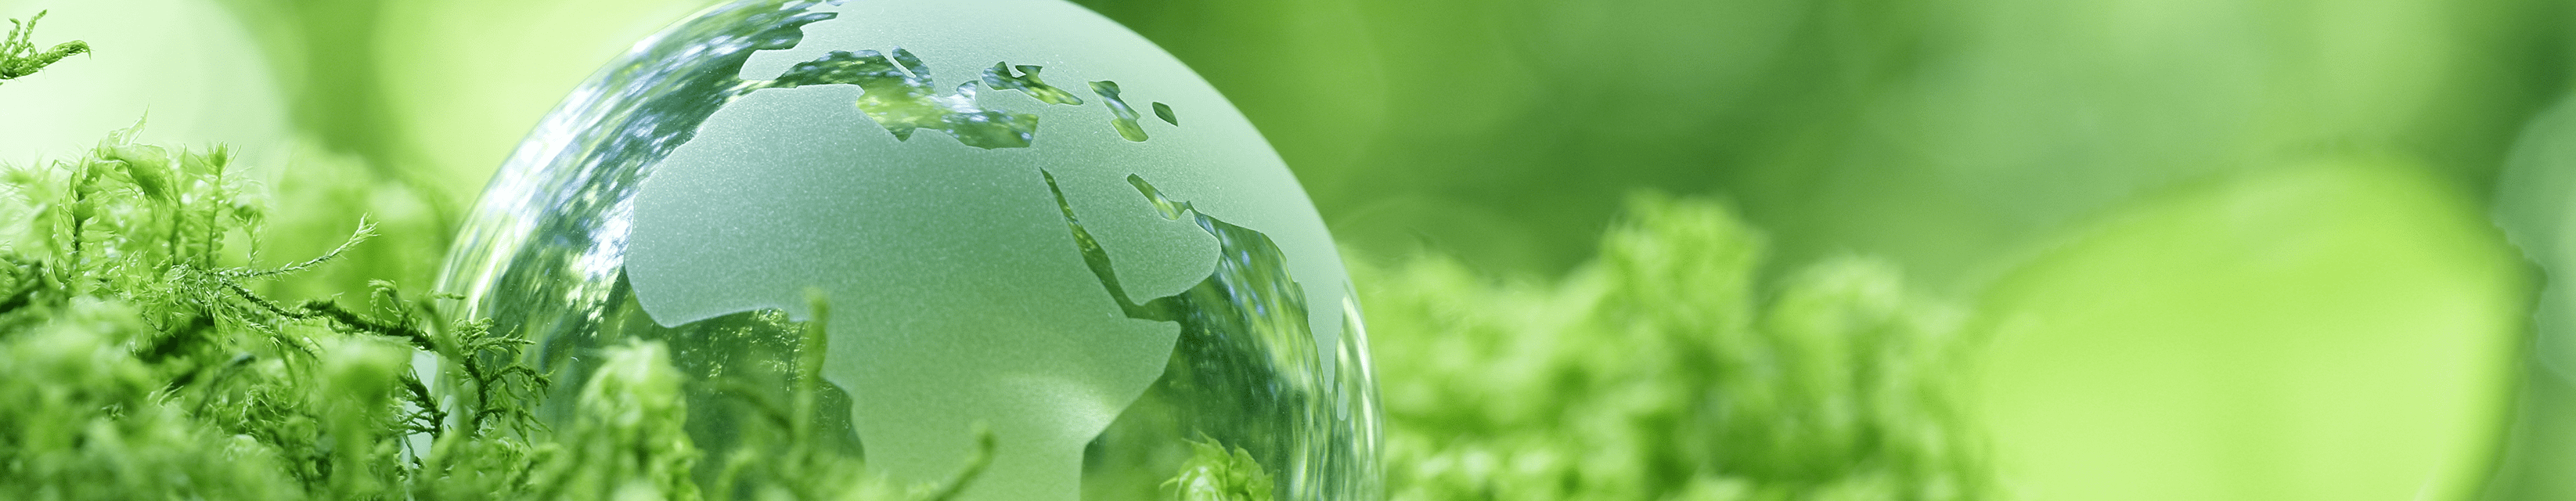 Inkjet printers and the Sustainable Development Goals
